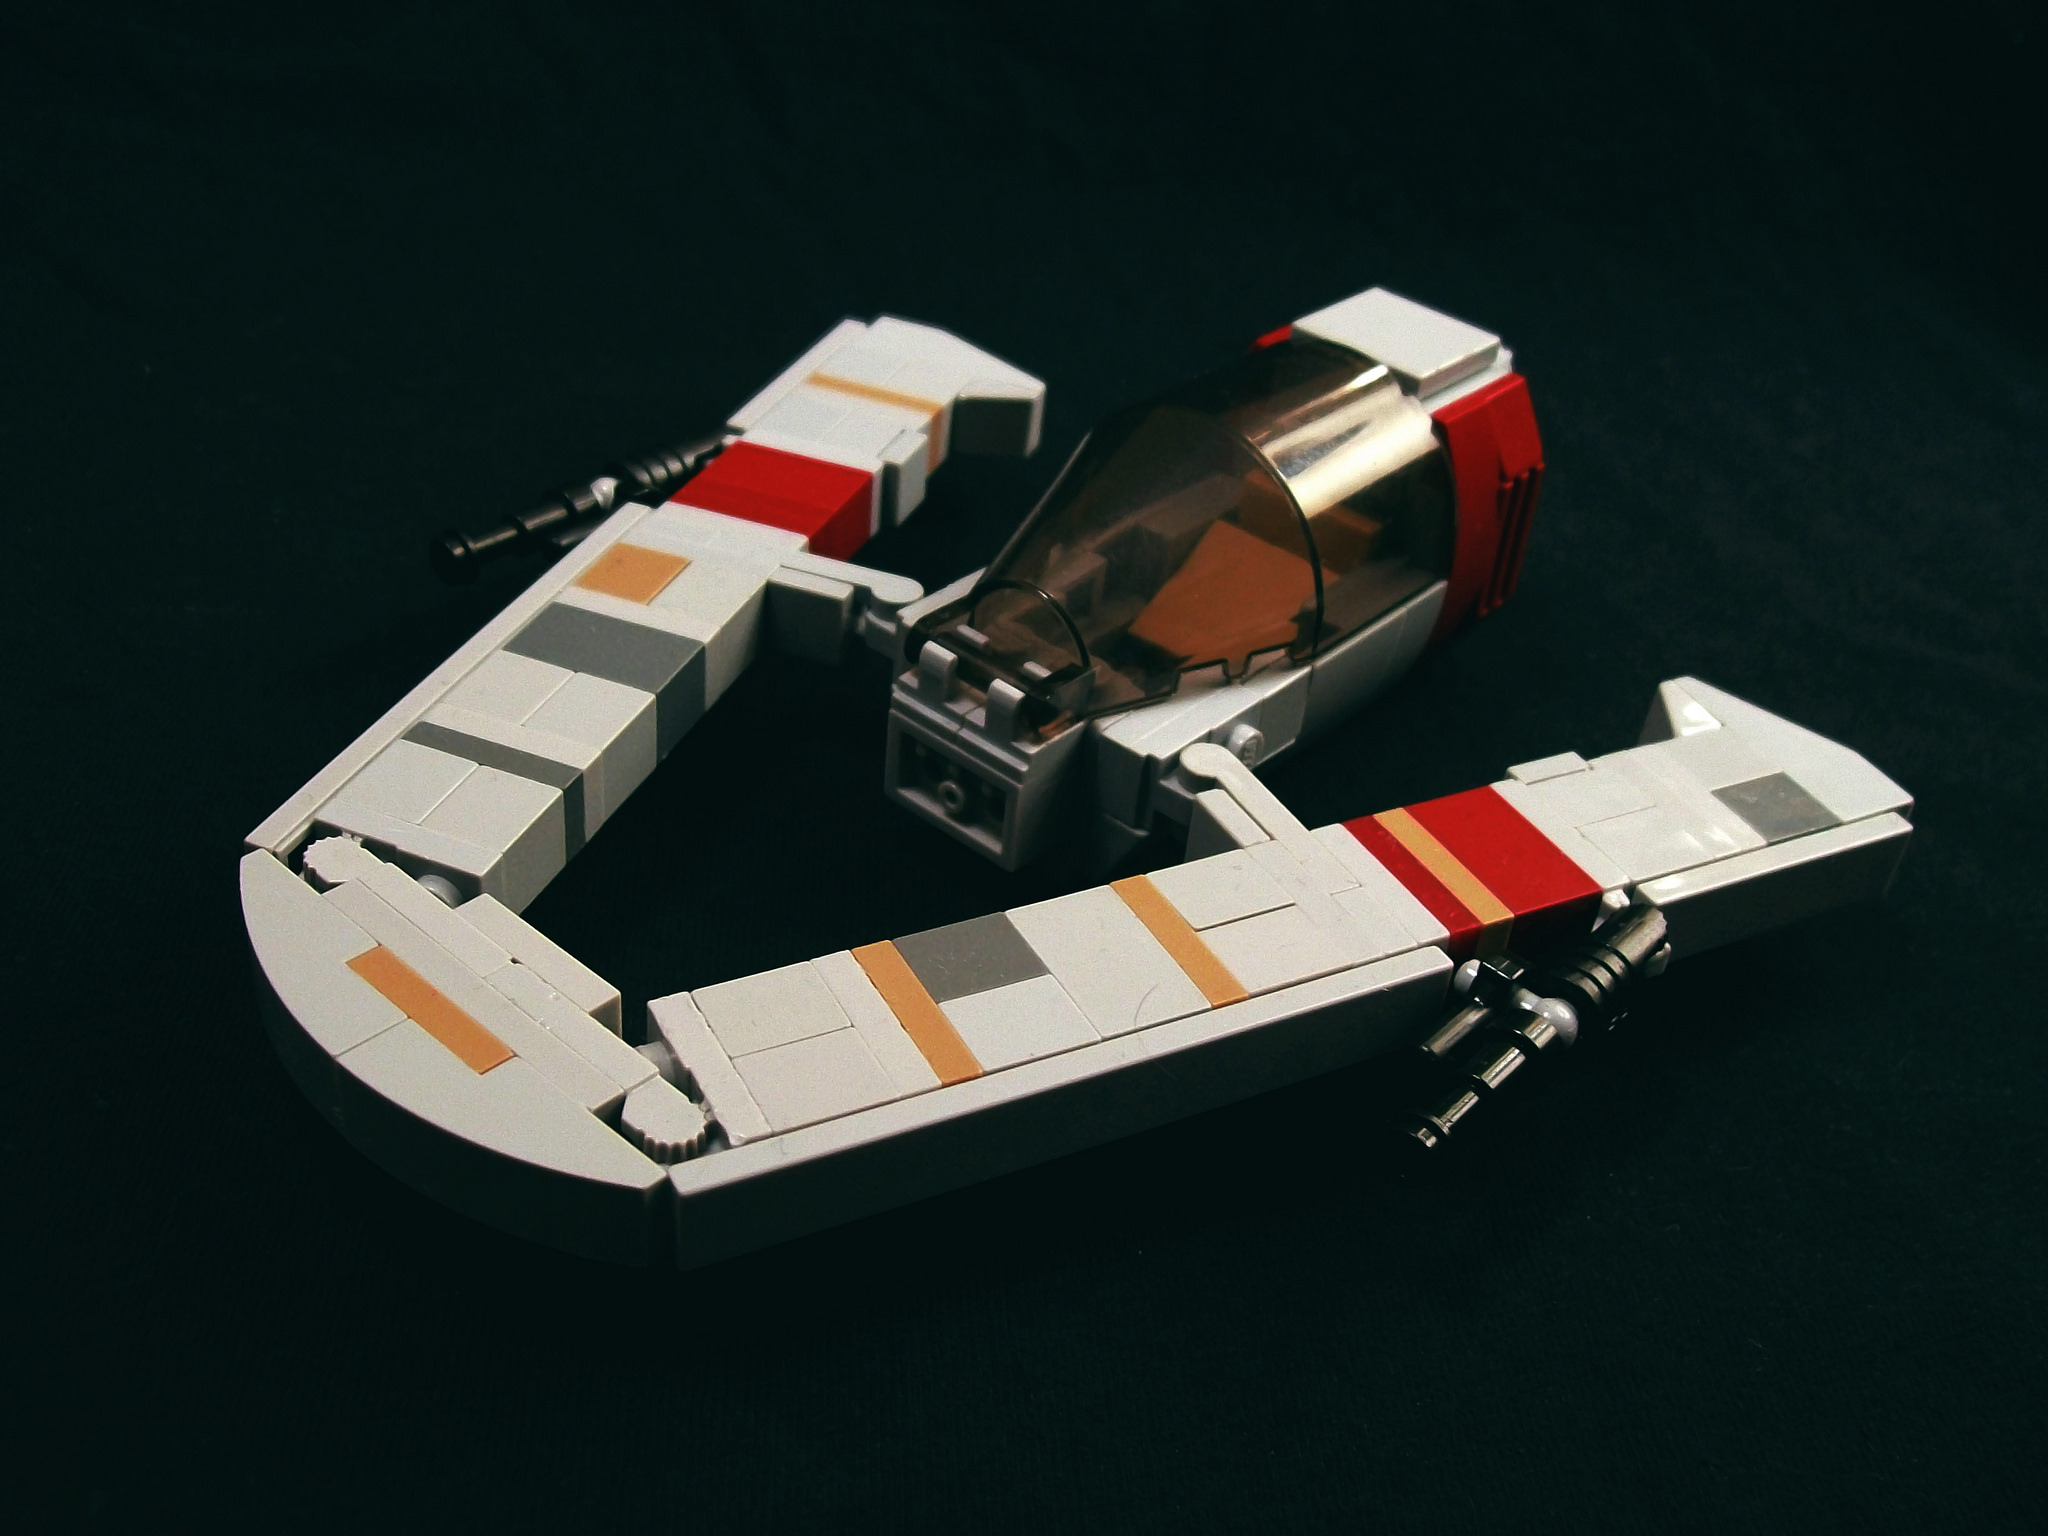 Redesigning Star Wars’ Coolest Vehicles (Using LEGO)